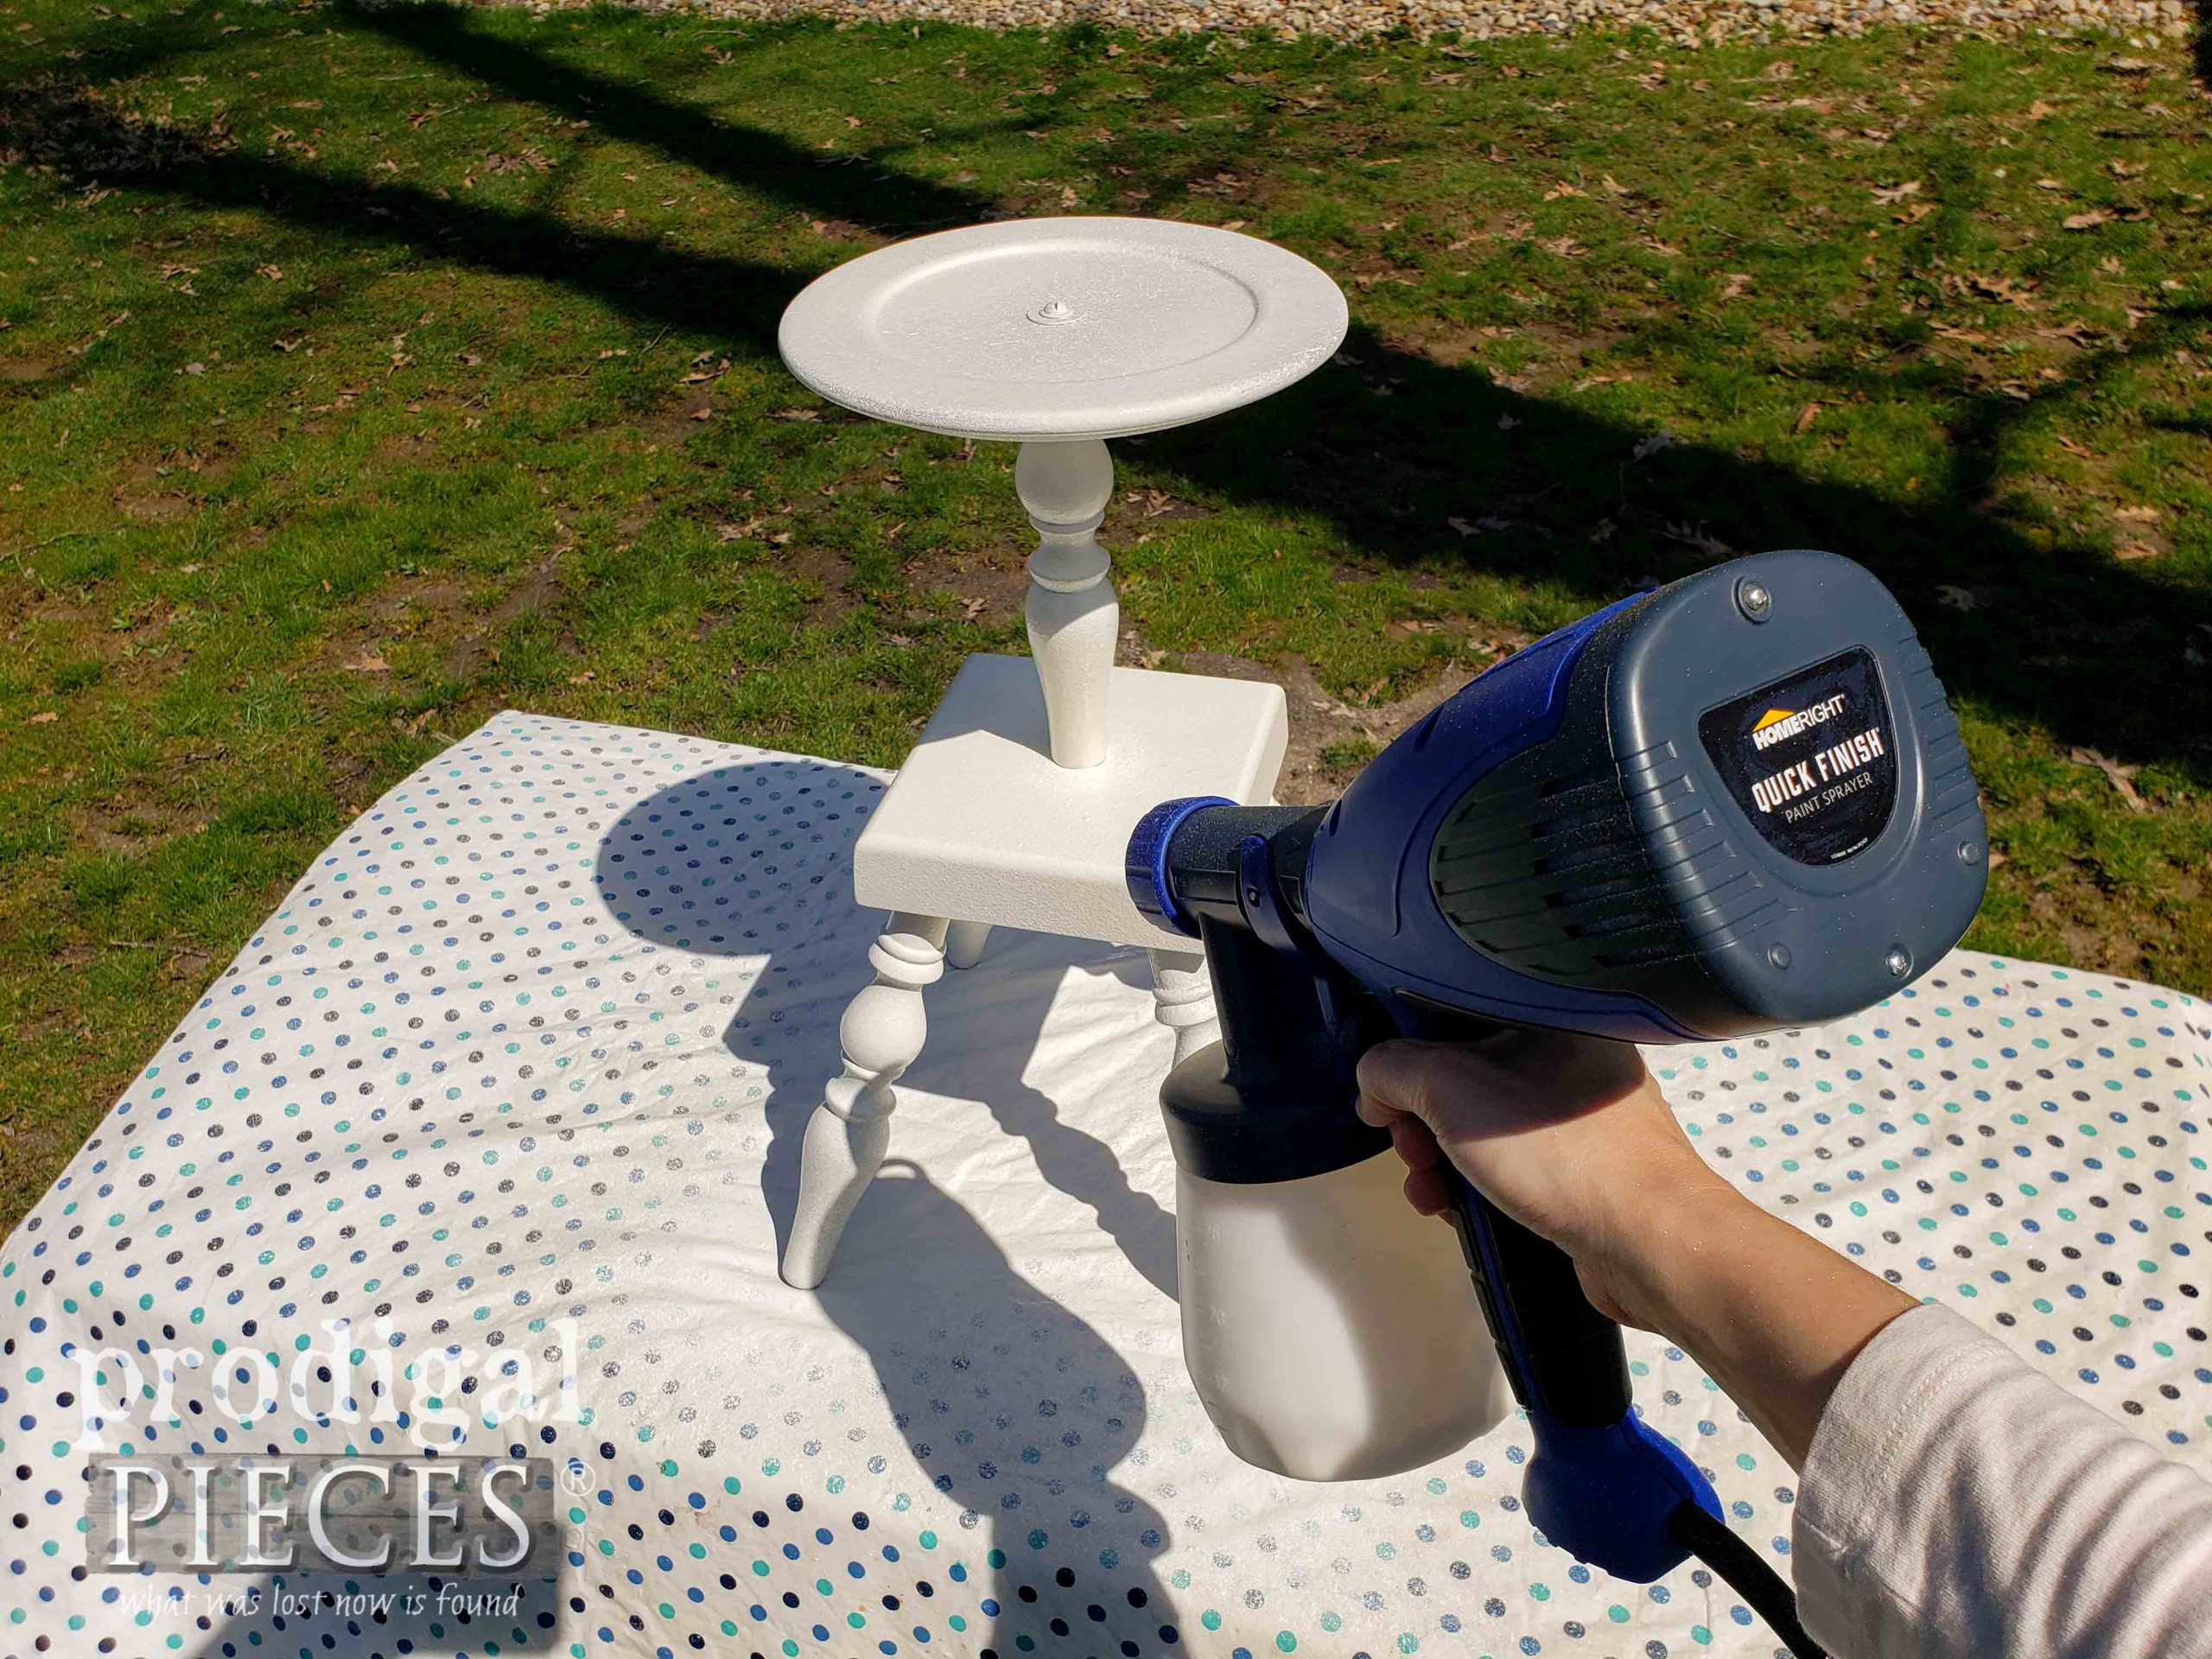 Spraying Upcycled Clock Face Table Base with Paint in HomeRight Quick Finish Sprayer | prodigalpieces.com #prodigalpieces